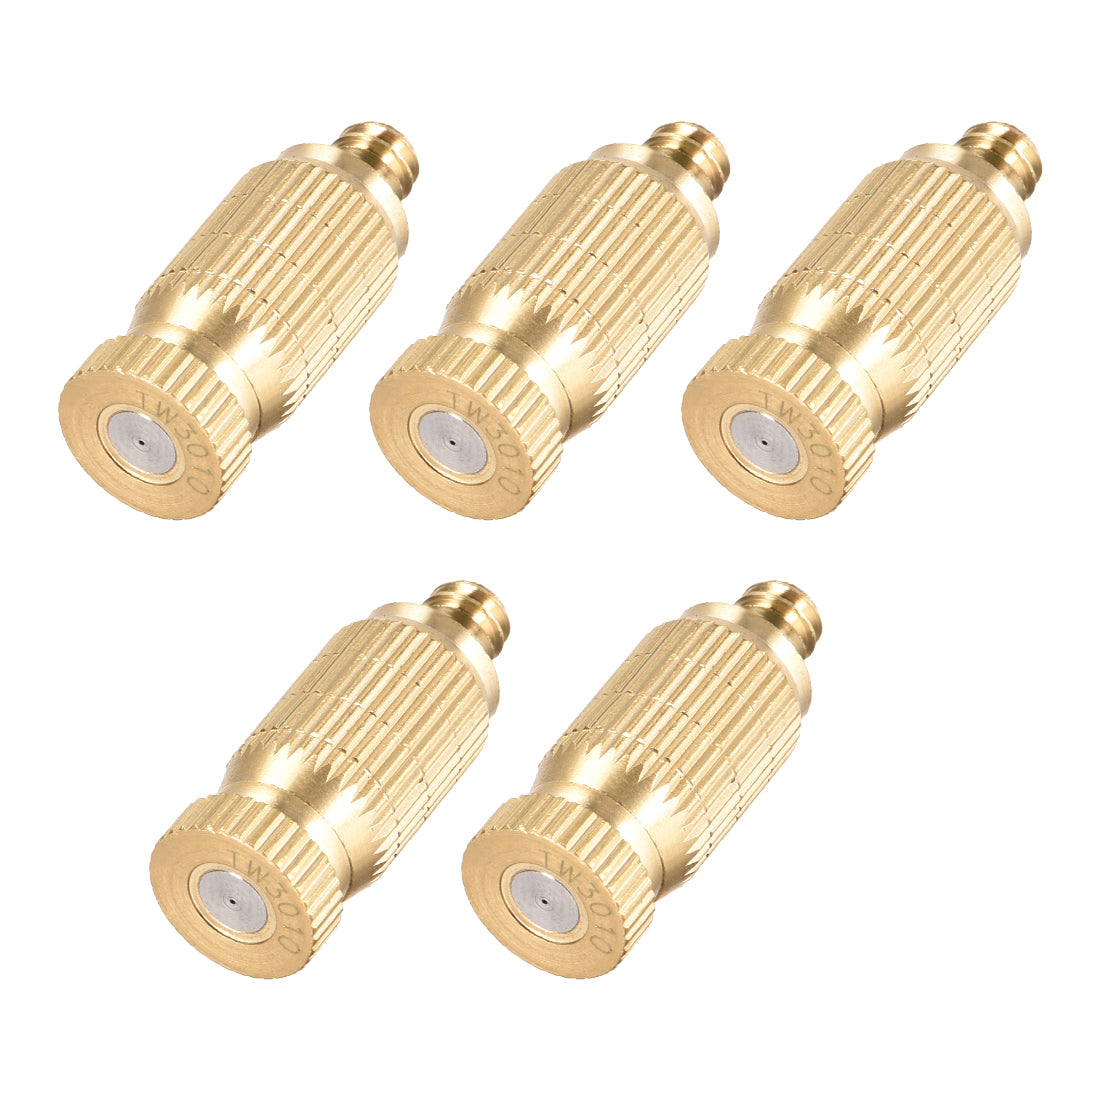 uxcell Uxcell Brass Misting Nozzle - 3/16-inch Threaded Fogging Spray Head for Outdoor Cooling System - 5 Pcs